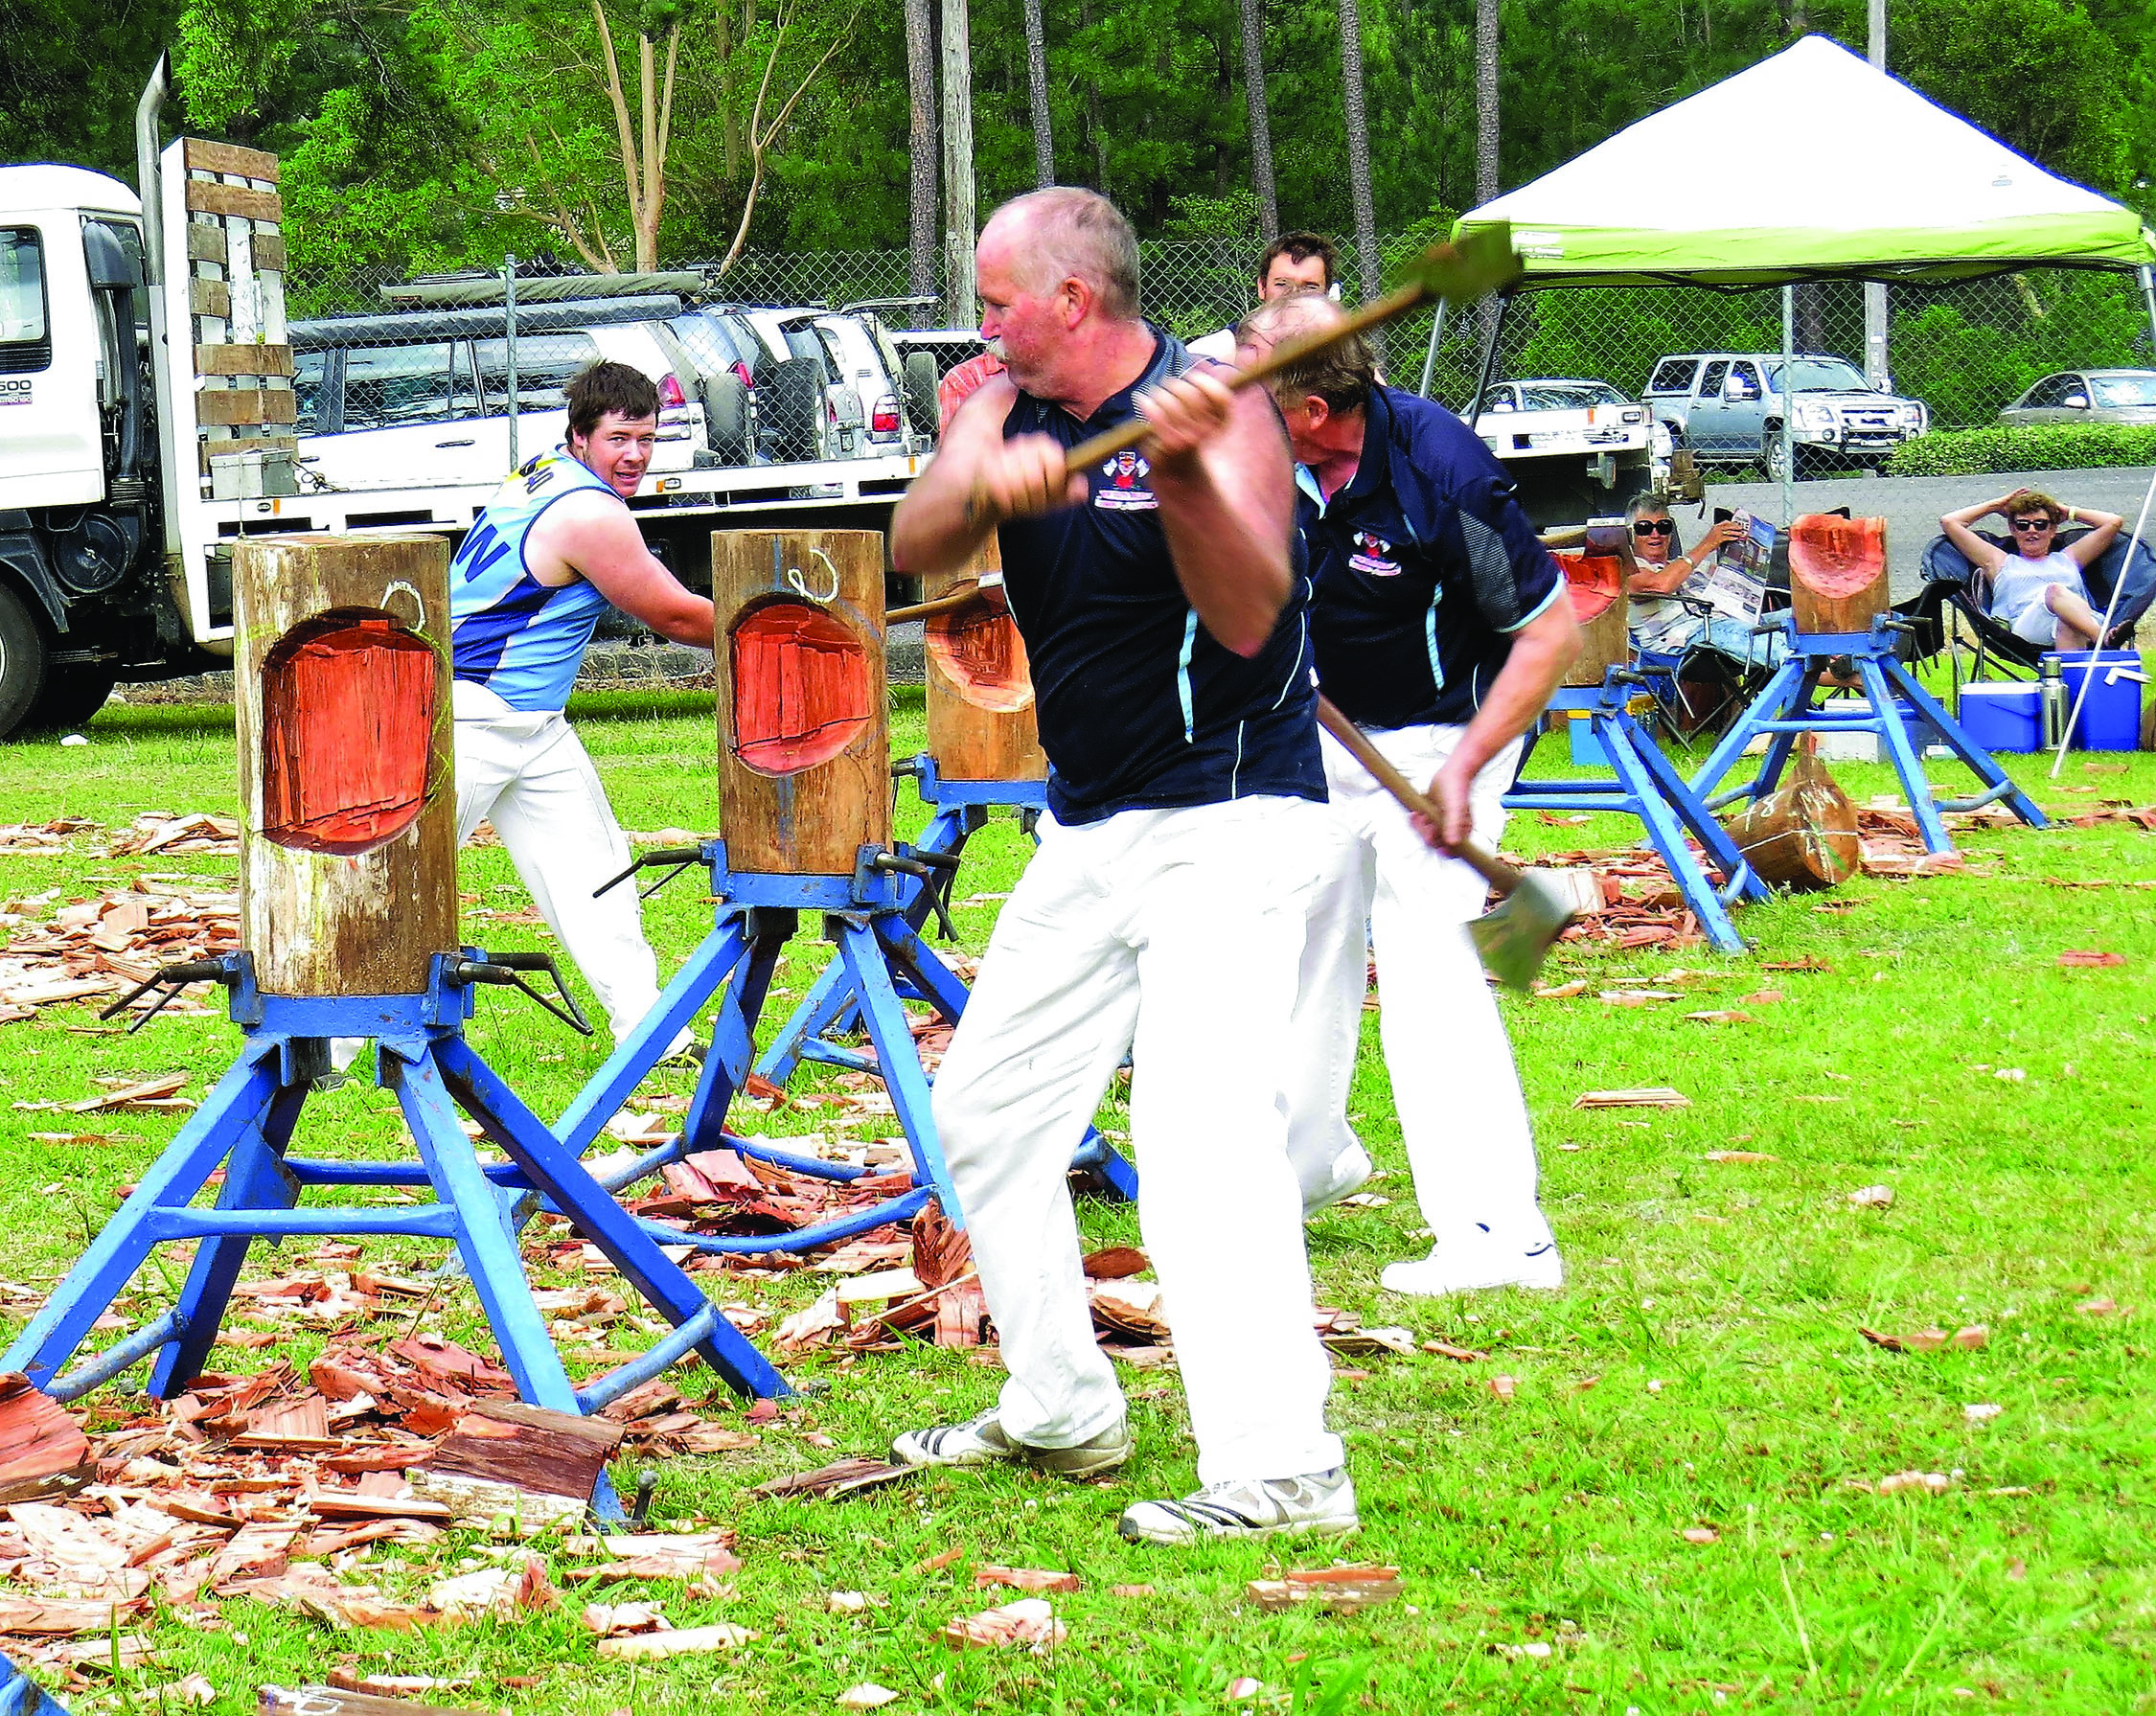 CHOP CHOP: Axemen show their skills in the woodchop competition